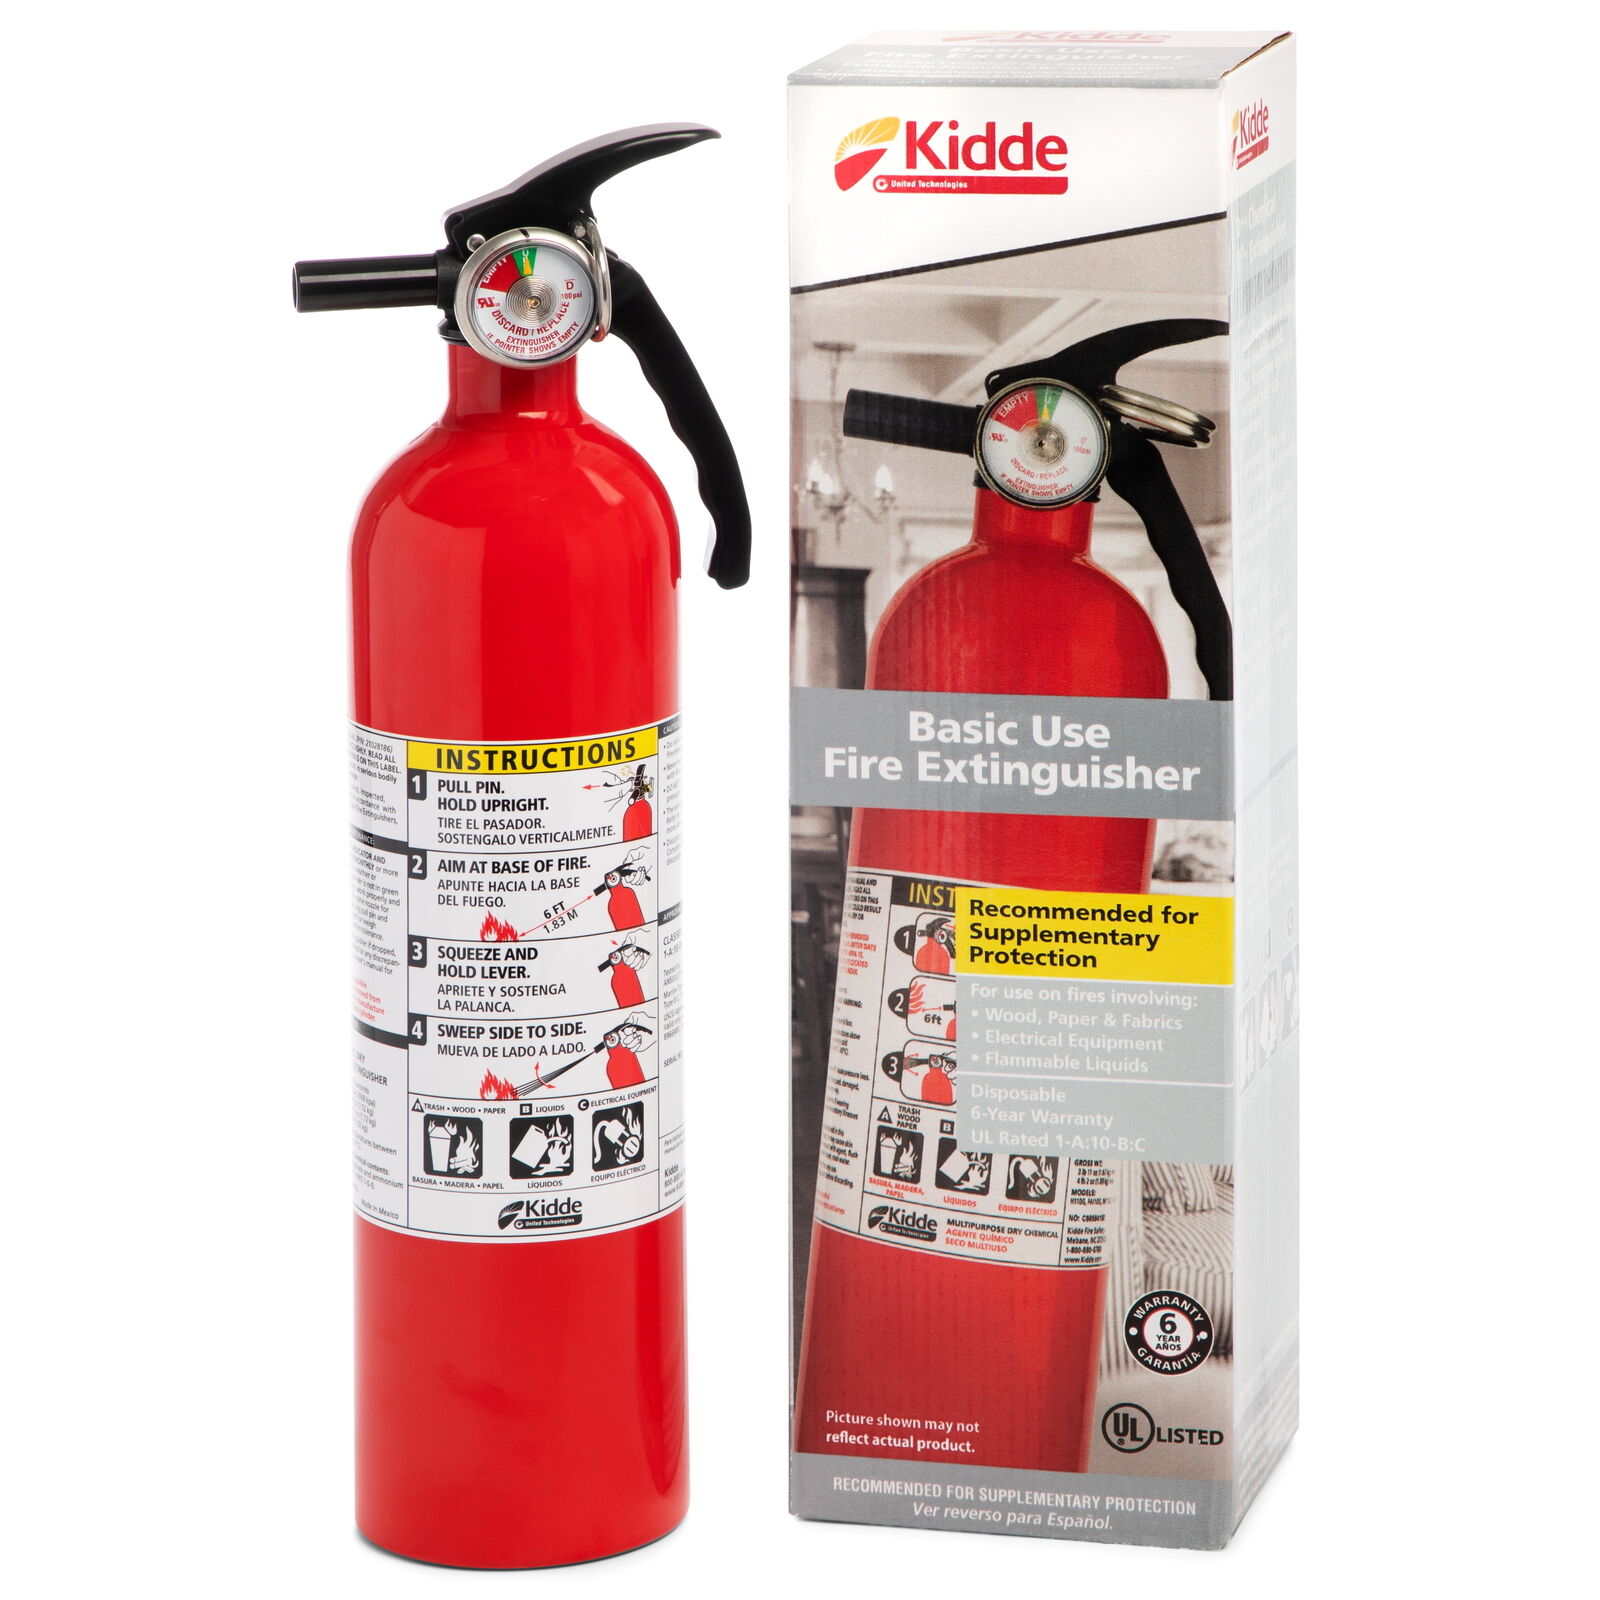 Multipurpose Home Fire Extinguisher, UL Rated 1-A:10-B:C, Model KD82-110AB